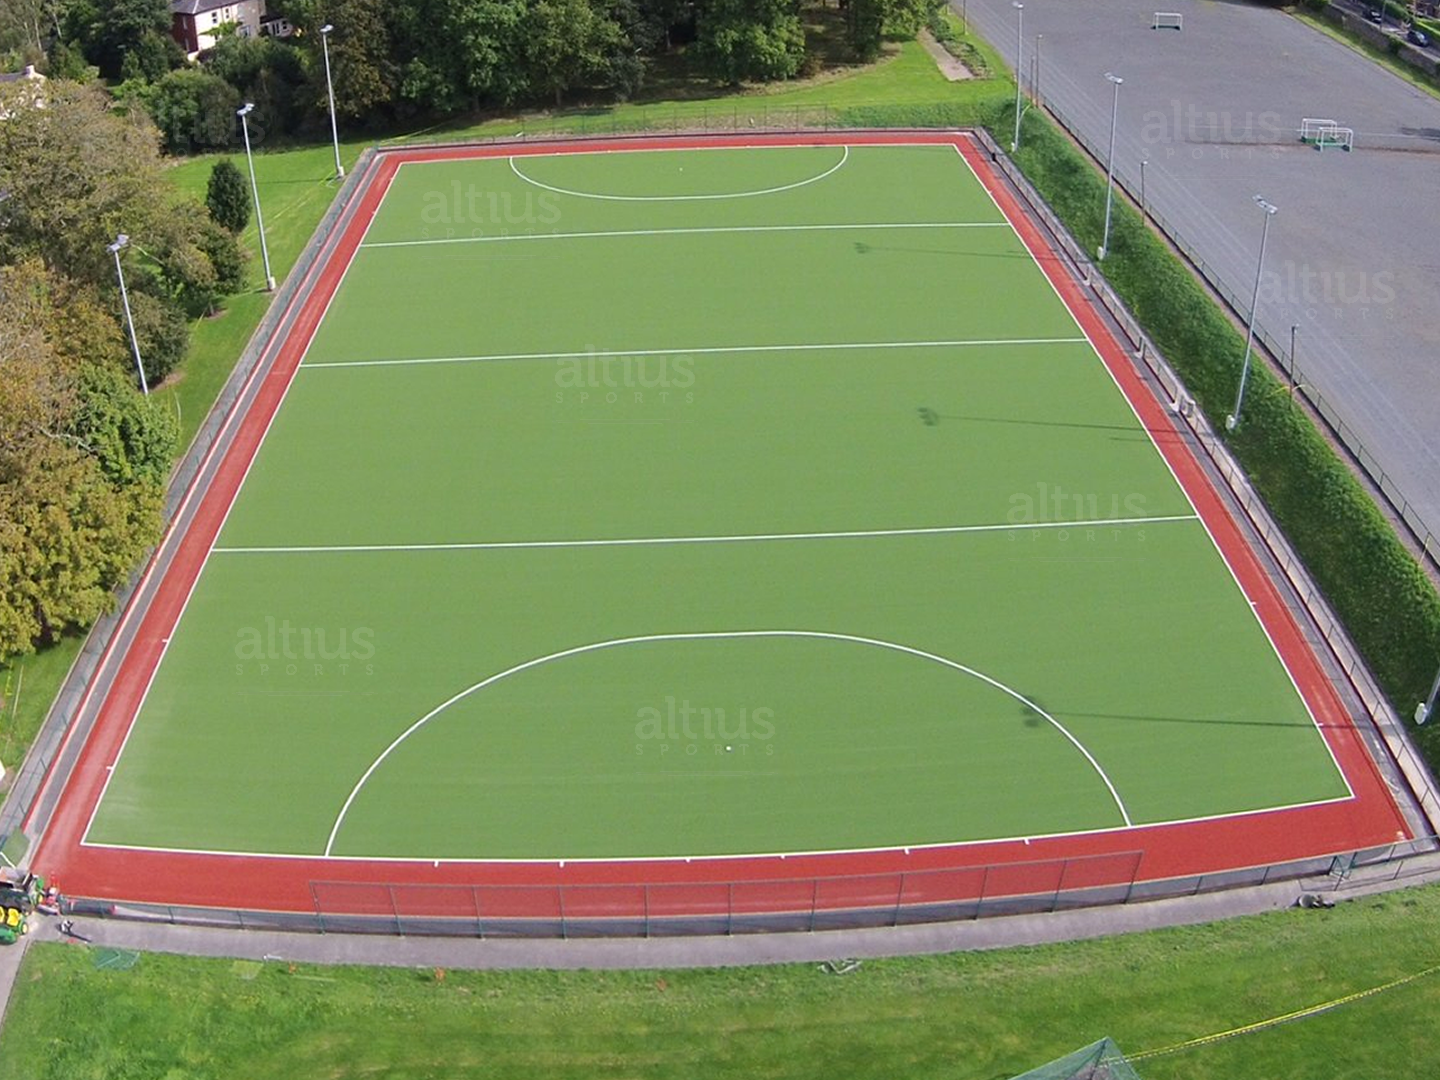 altiussports artificial turf, synthetic turf